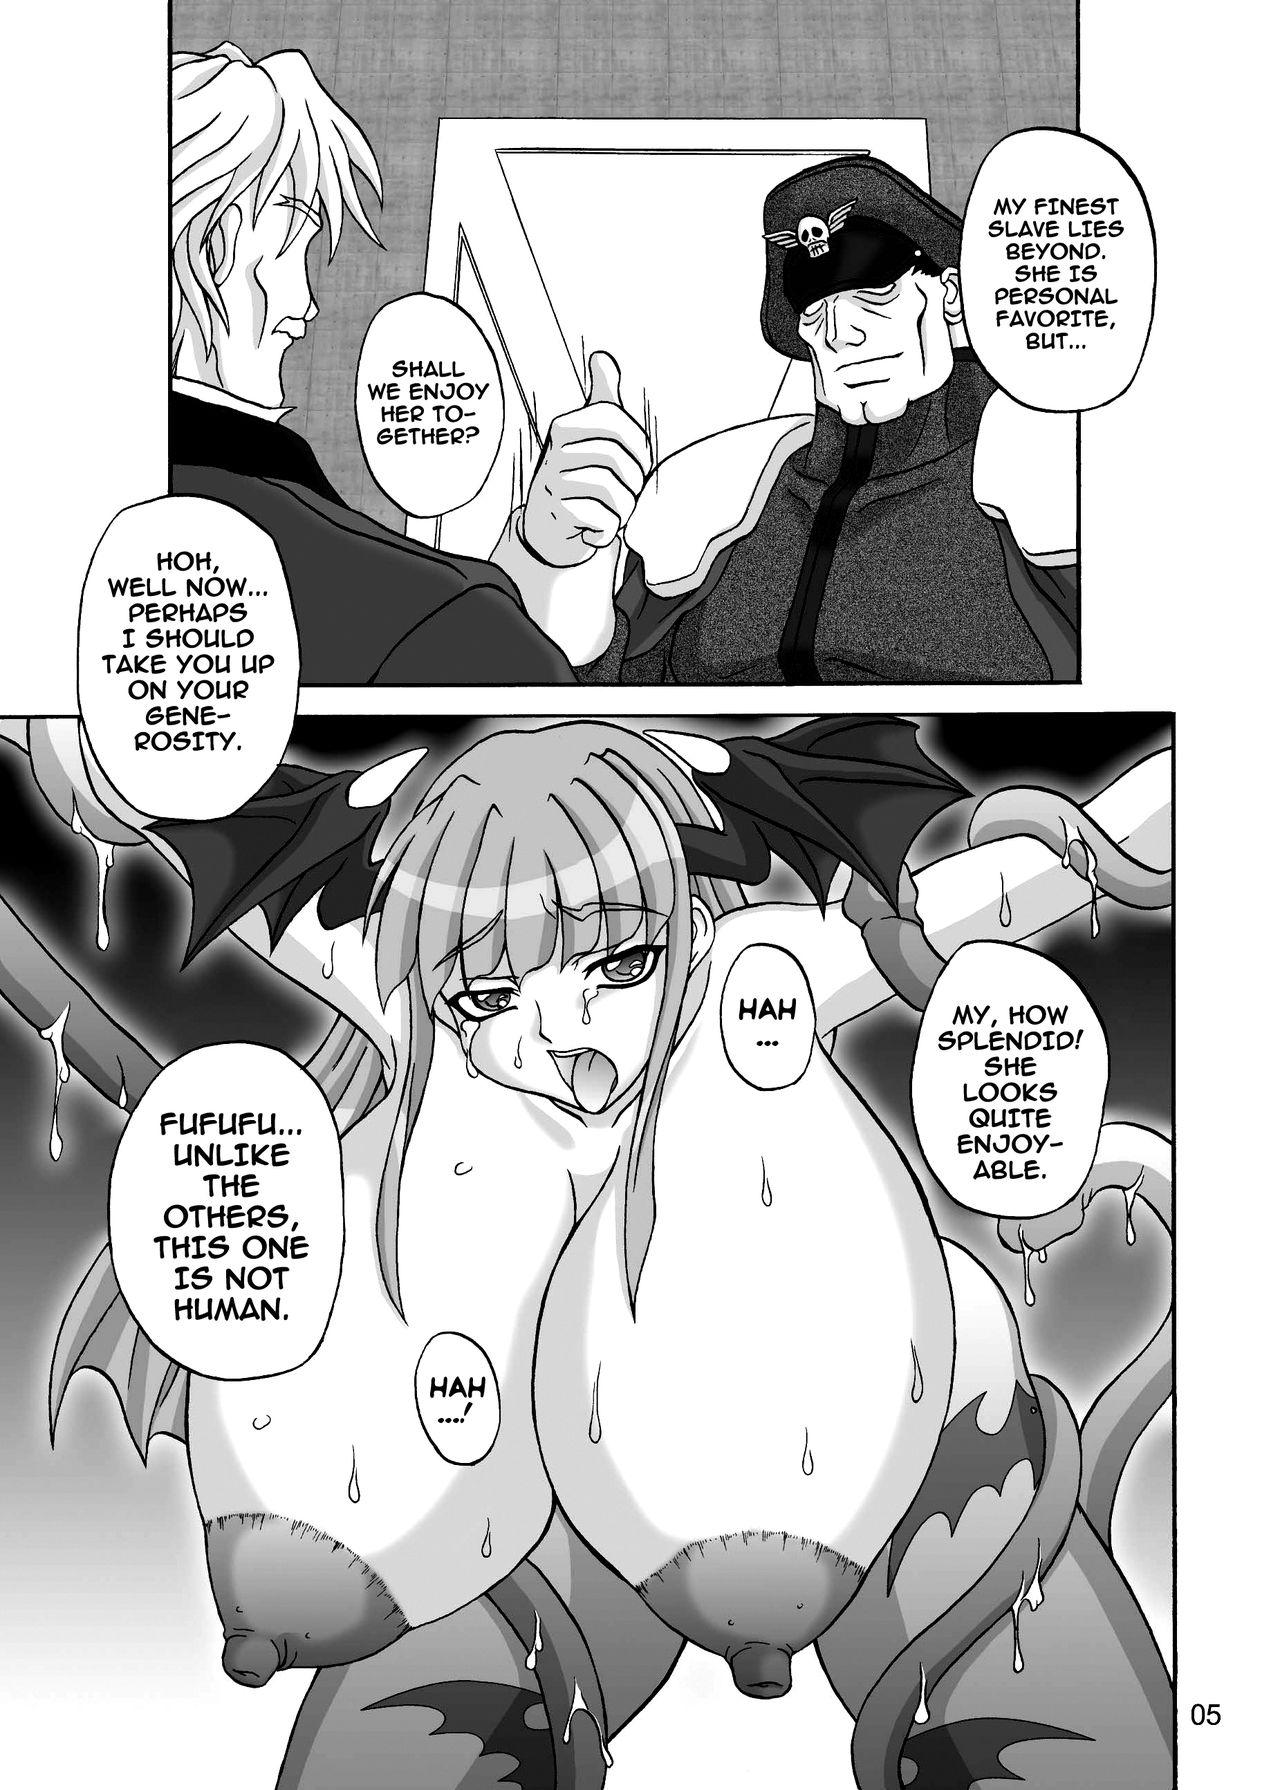 Tease Insanity 2 - King of fighters Darkstalkers Gaypawn - Page 4